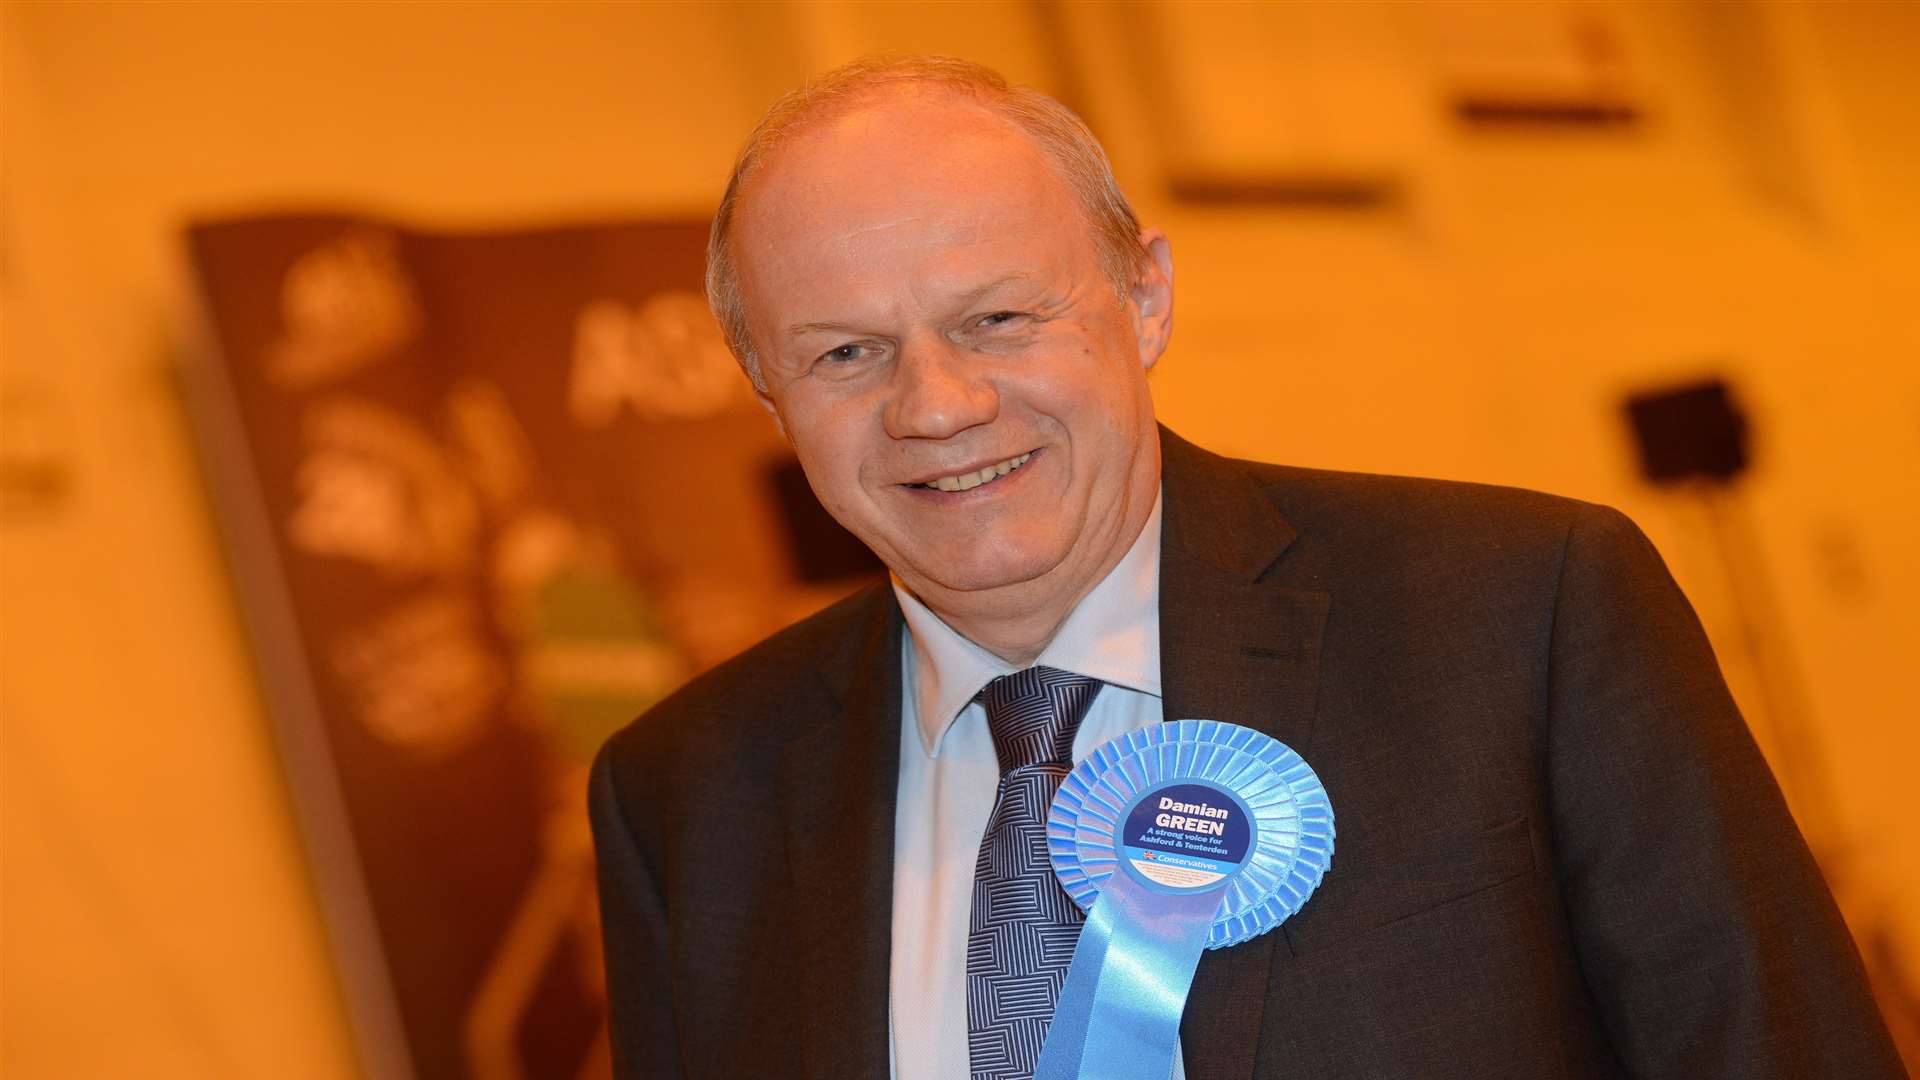 Damian Green retains the Conservative seat in Ashford